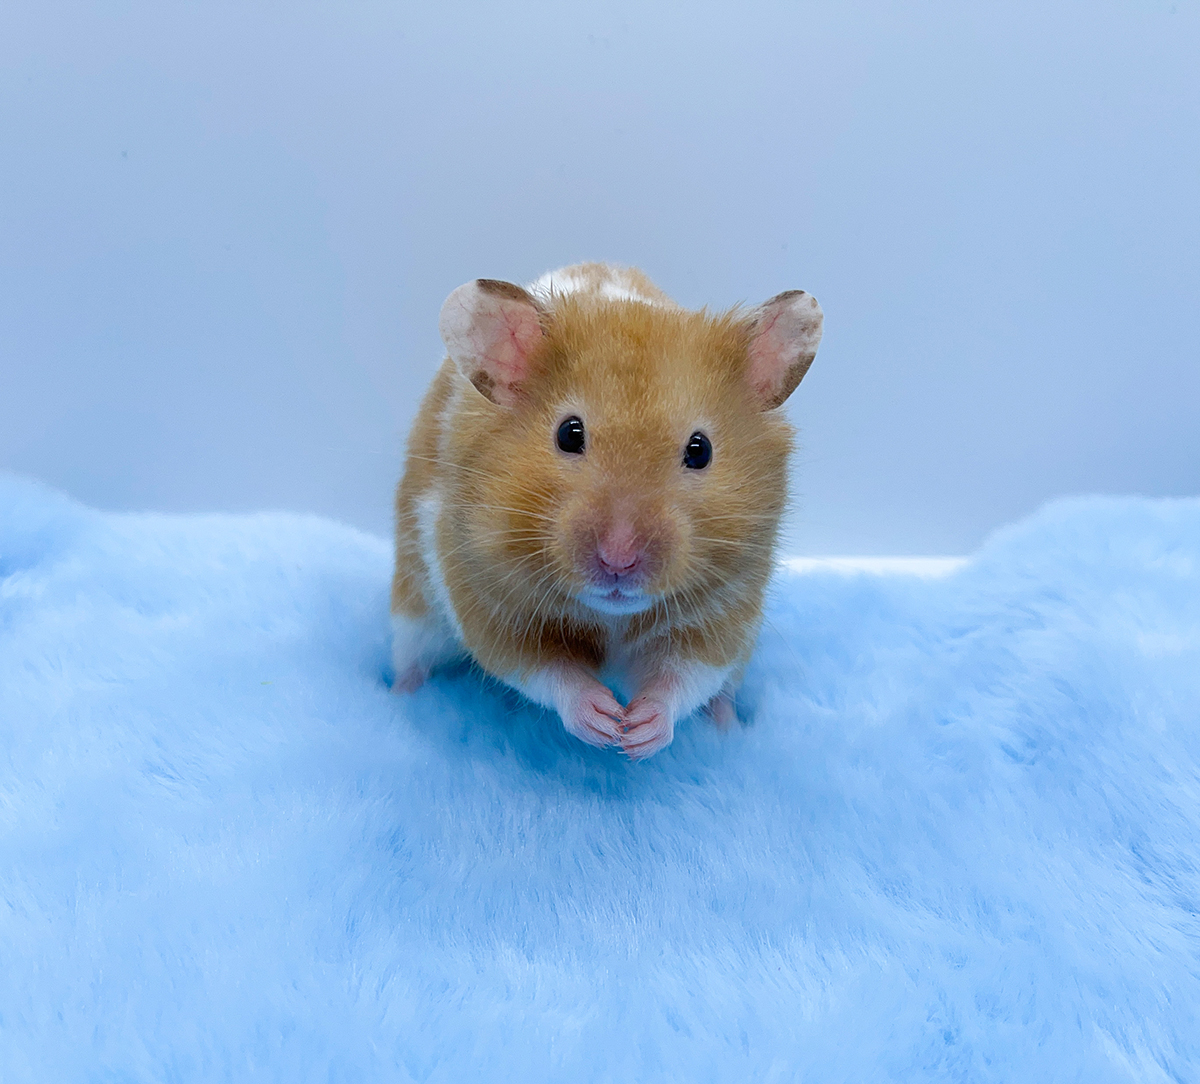 Syrian hamster on blue furry material. These hamsters are susceptible to SARS-CoV-2 infection and so provide a useful model for testing COVID-19 treatments.